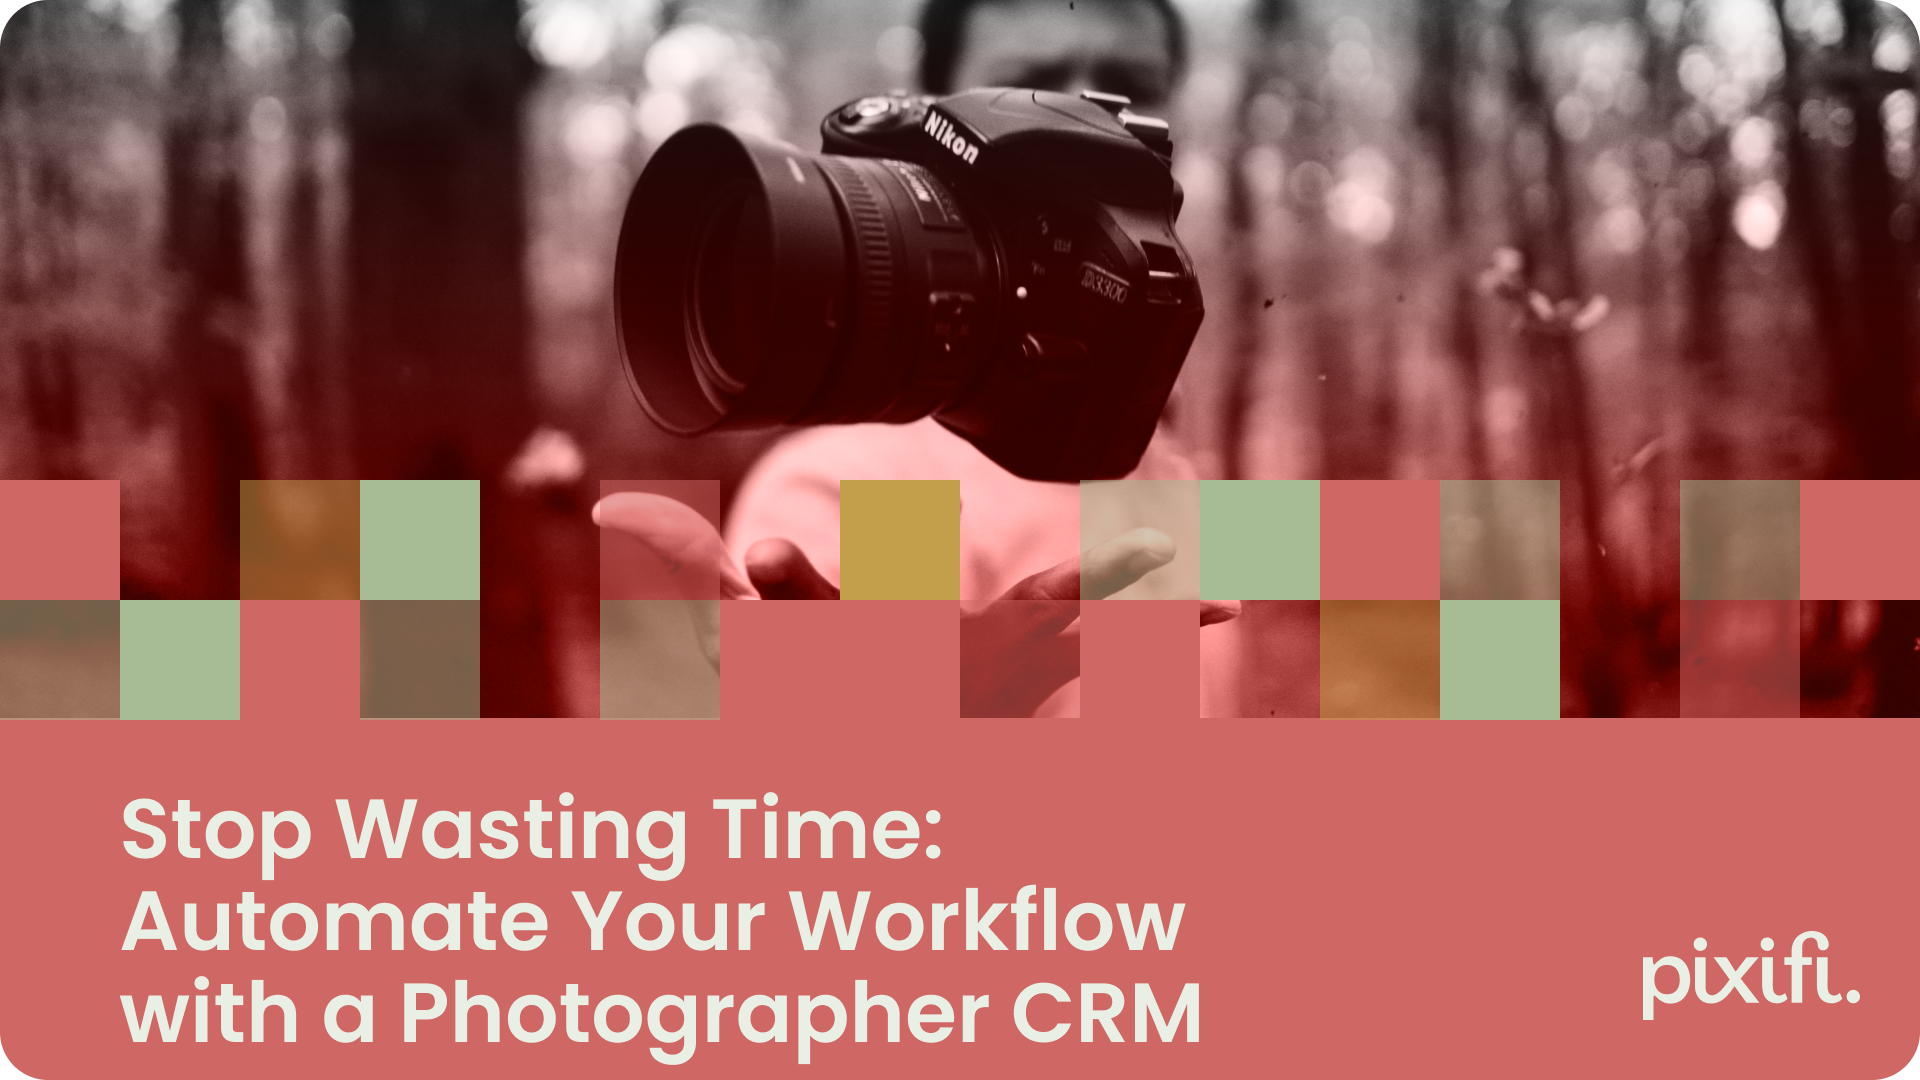 Stop Wasting Time: Automate Your Workflow with a Photographer CRM